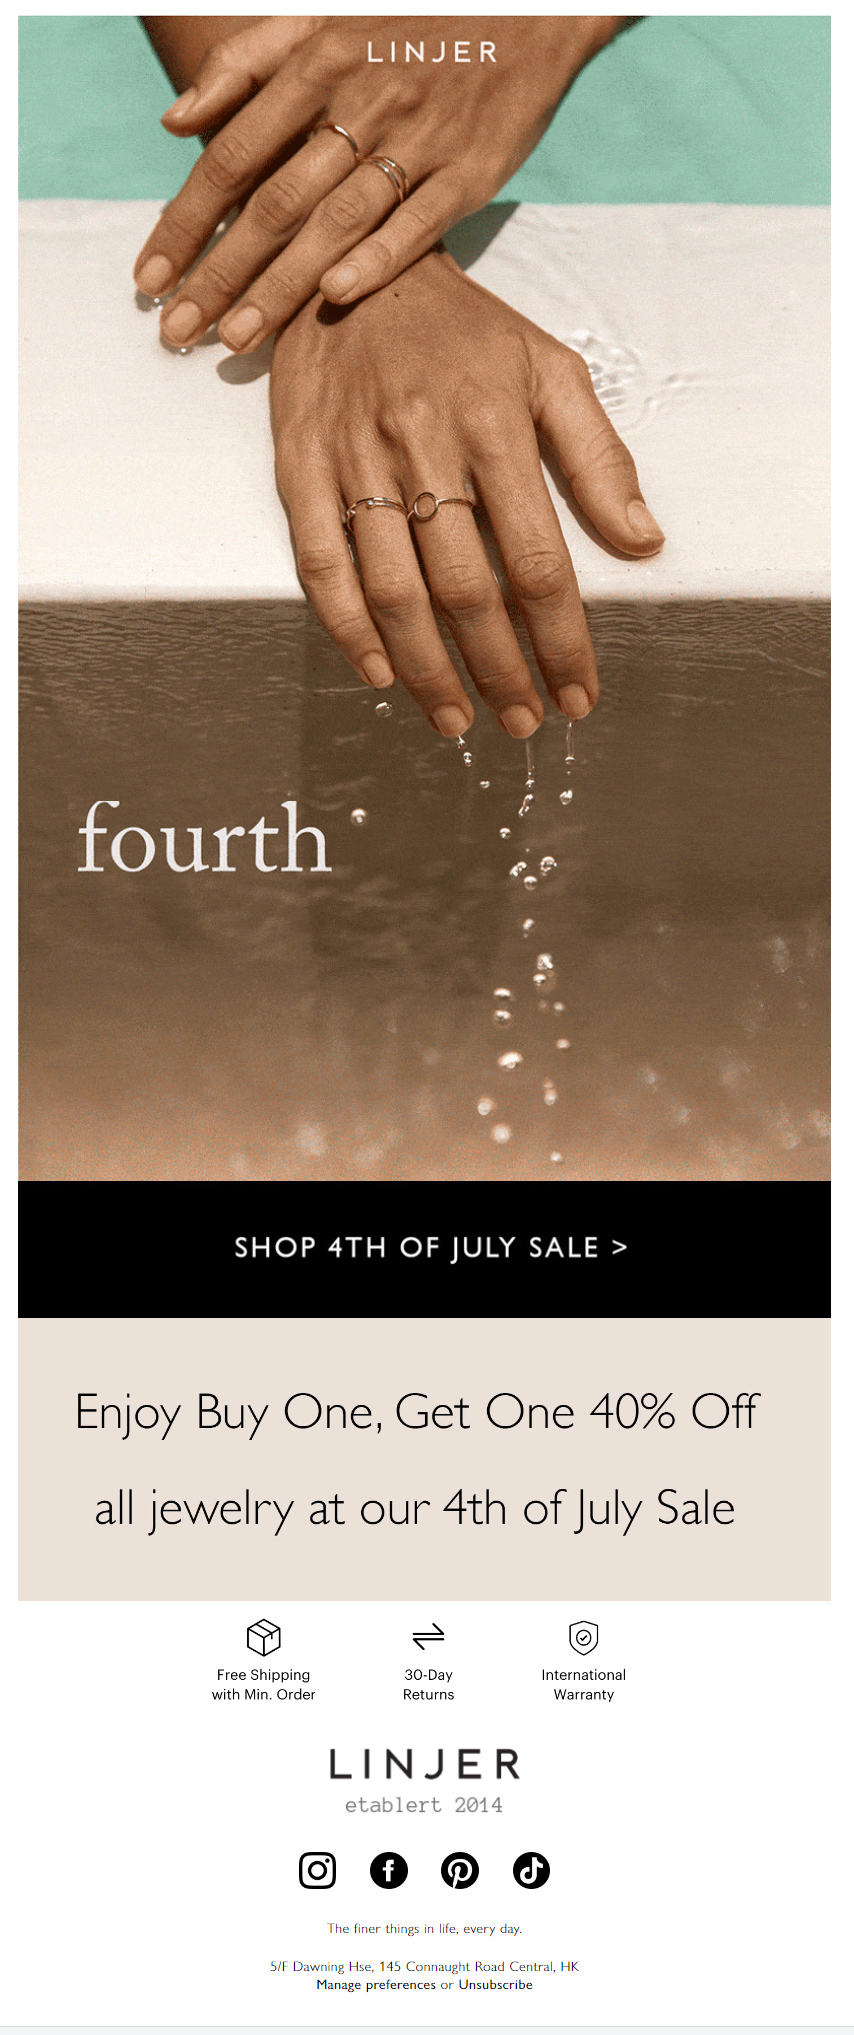 Linjer-4th of July email inspiration